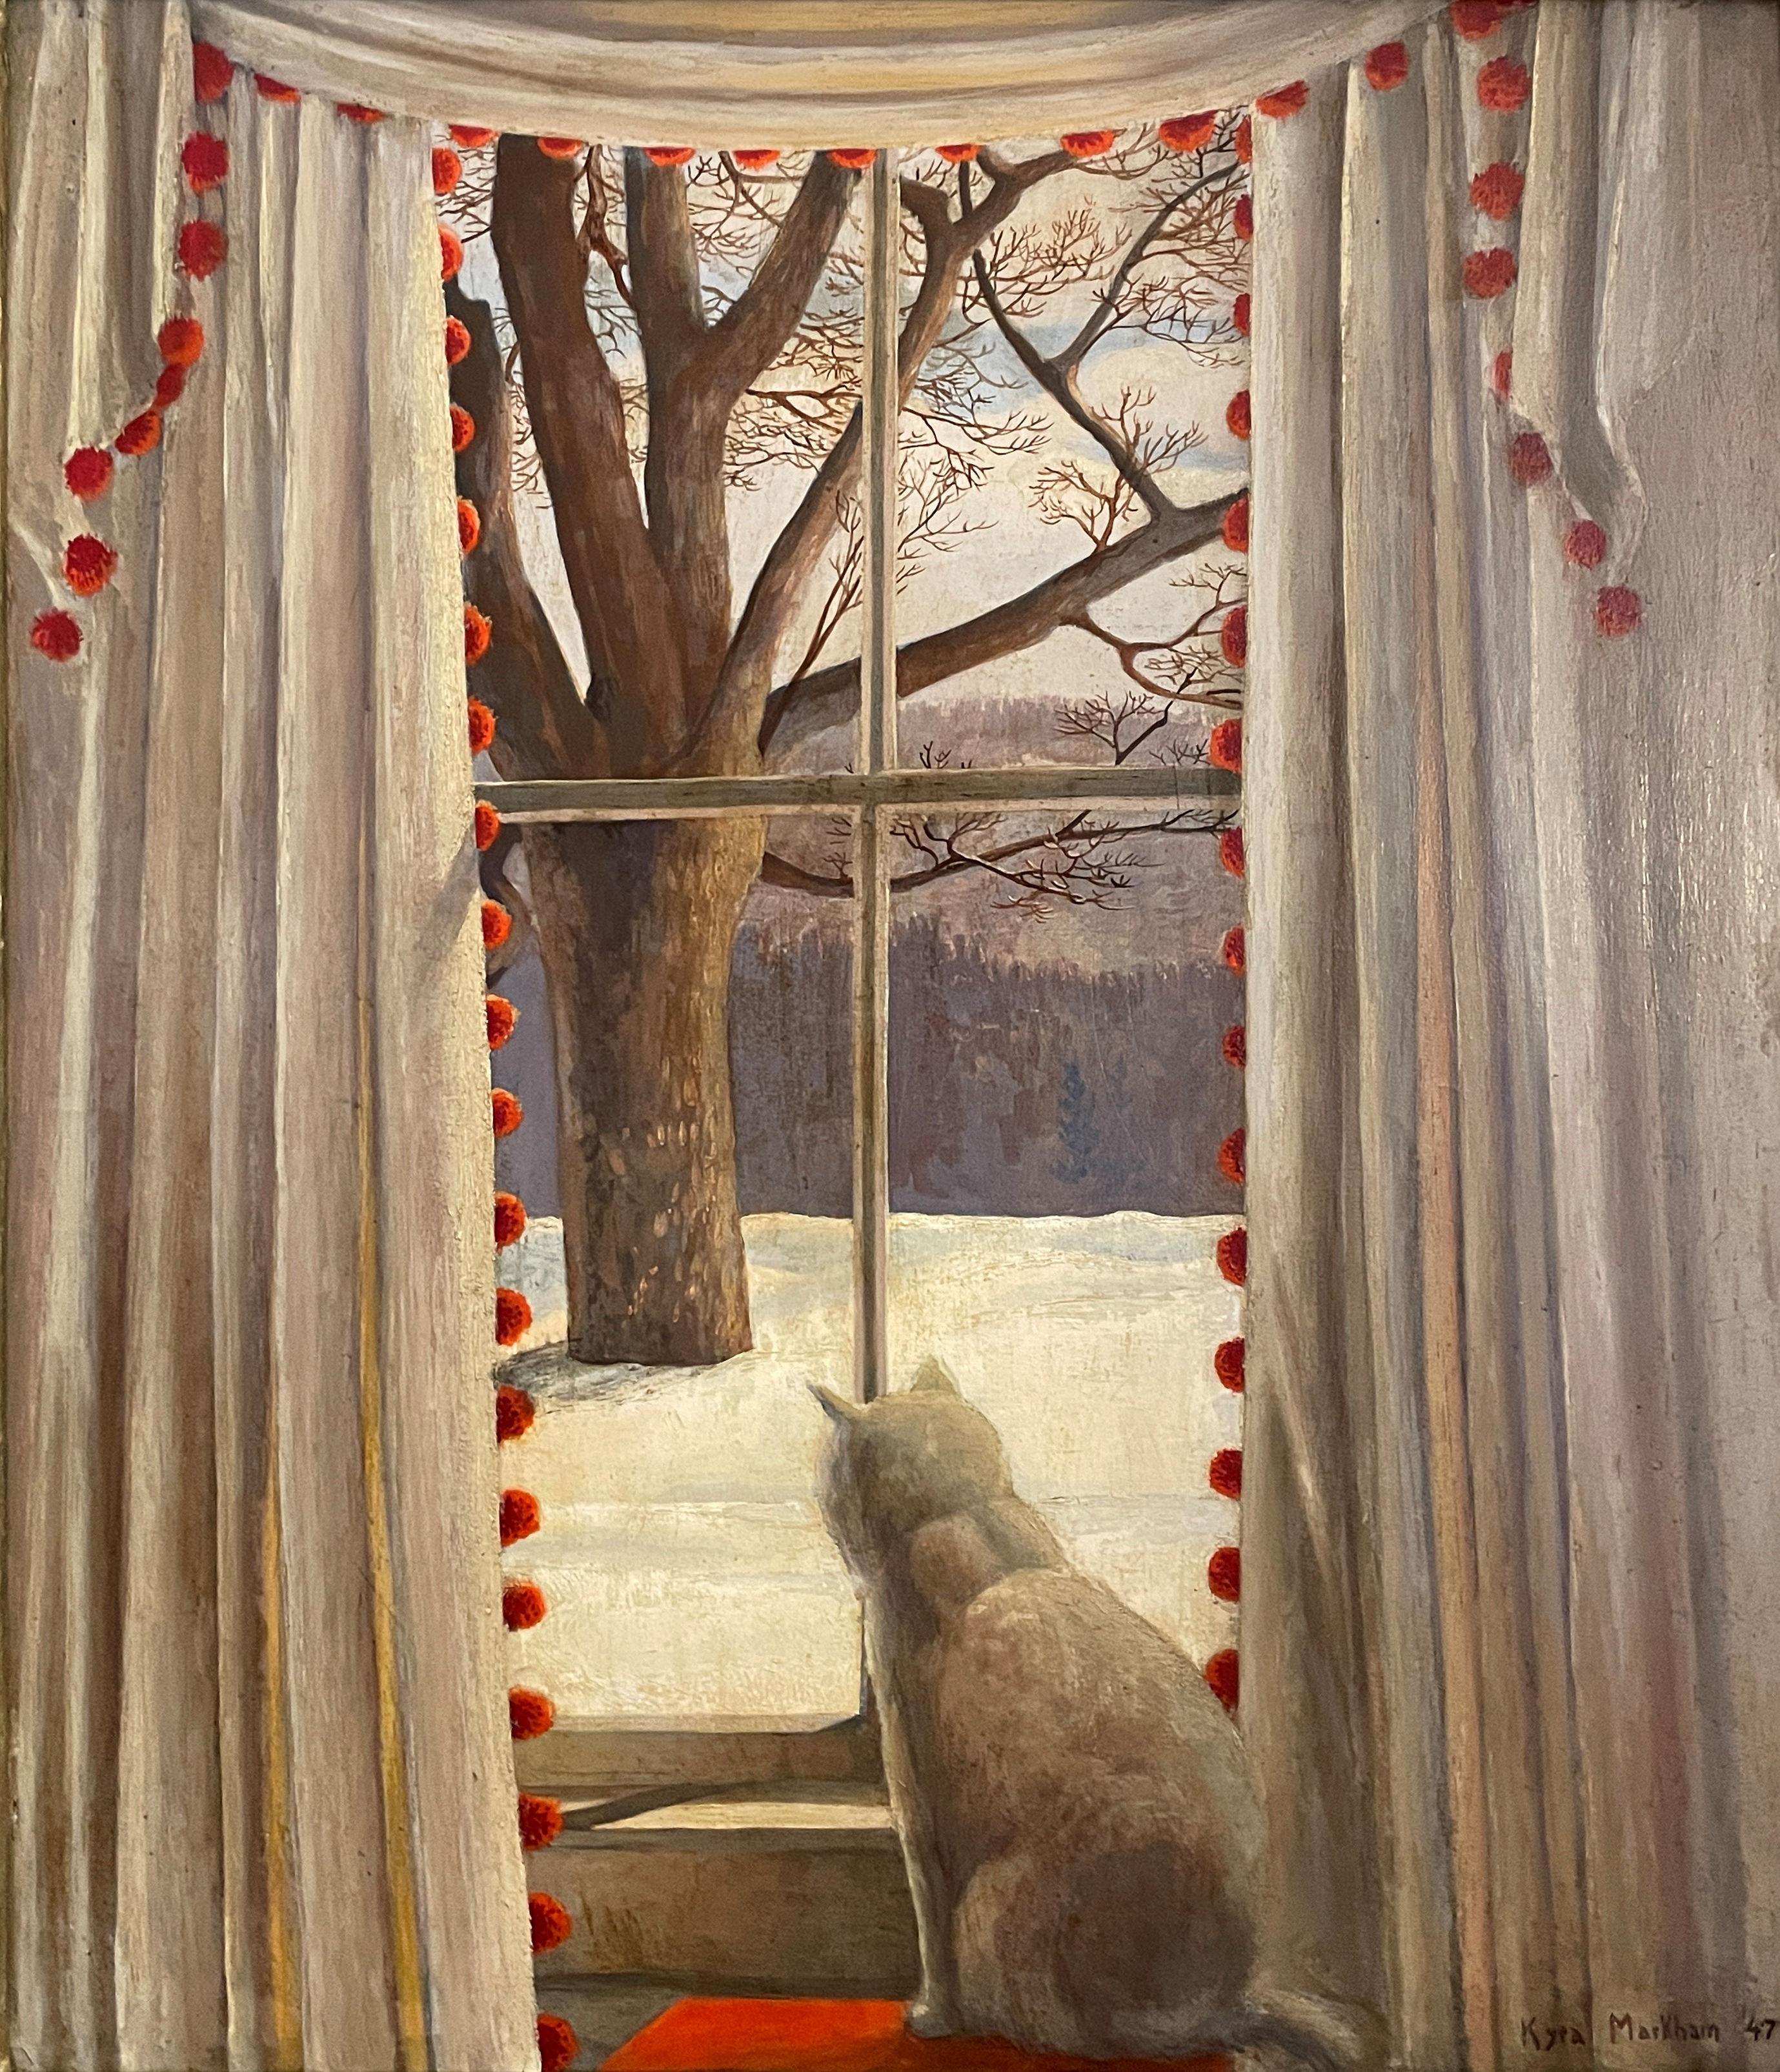 Kyra Markham
Looking Out the Window, Vermont, 1947
Signed and dated lower right
Oil on board
20 x 16 inches

Kyra Markham was an actress, figurative painter and printmaker. Markham was briefly married to the architect Frank Lloyd Wright, and five